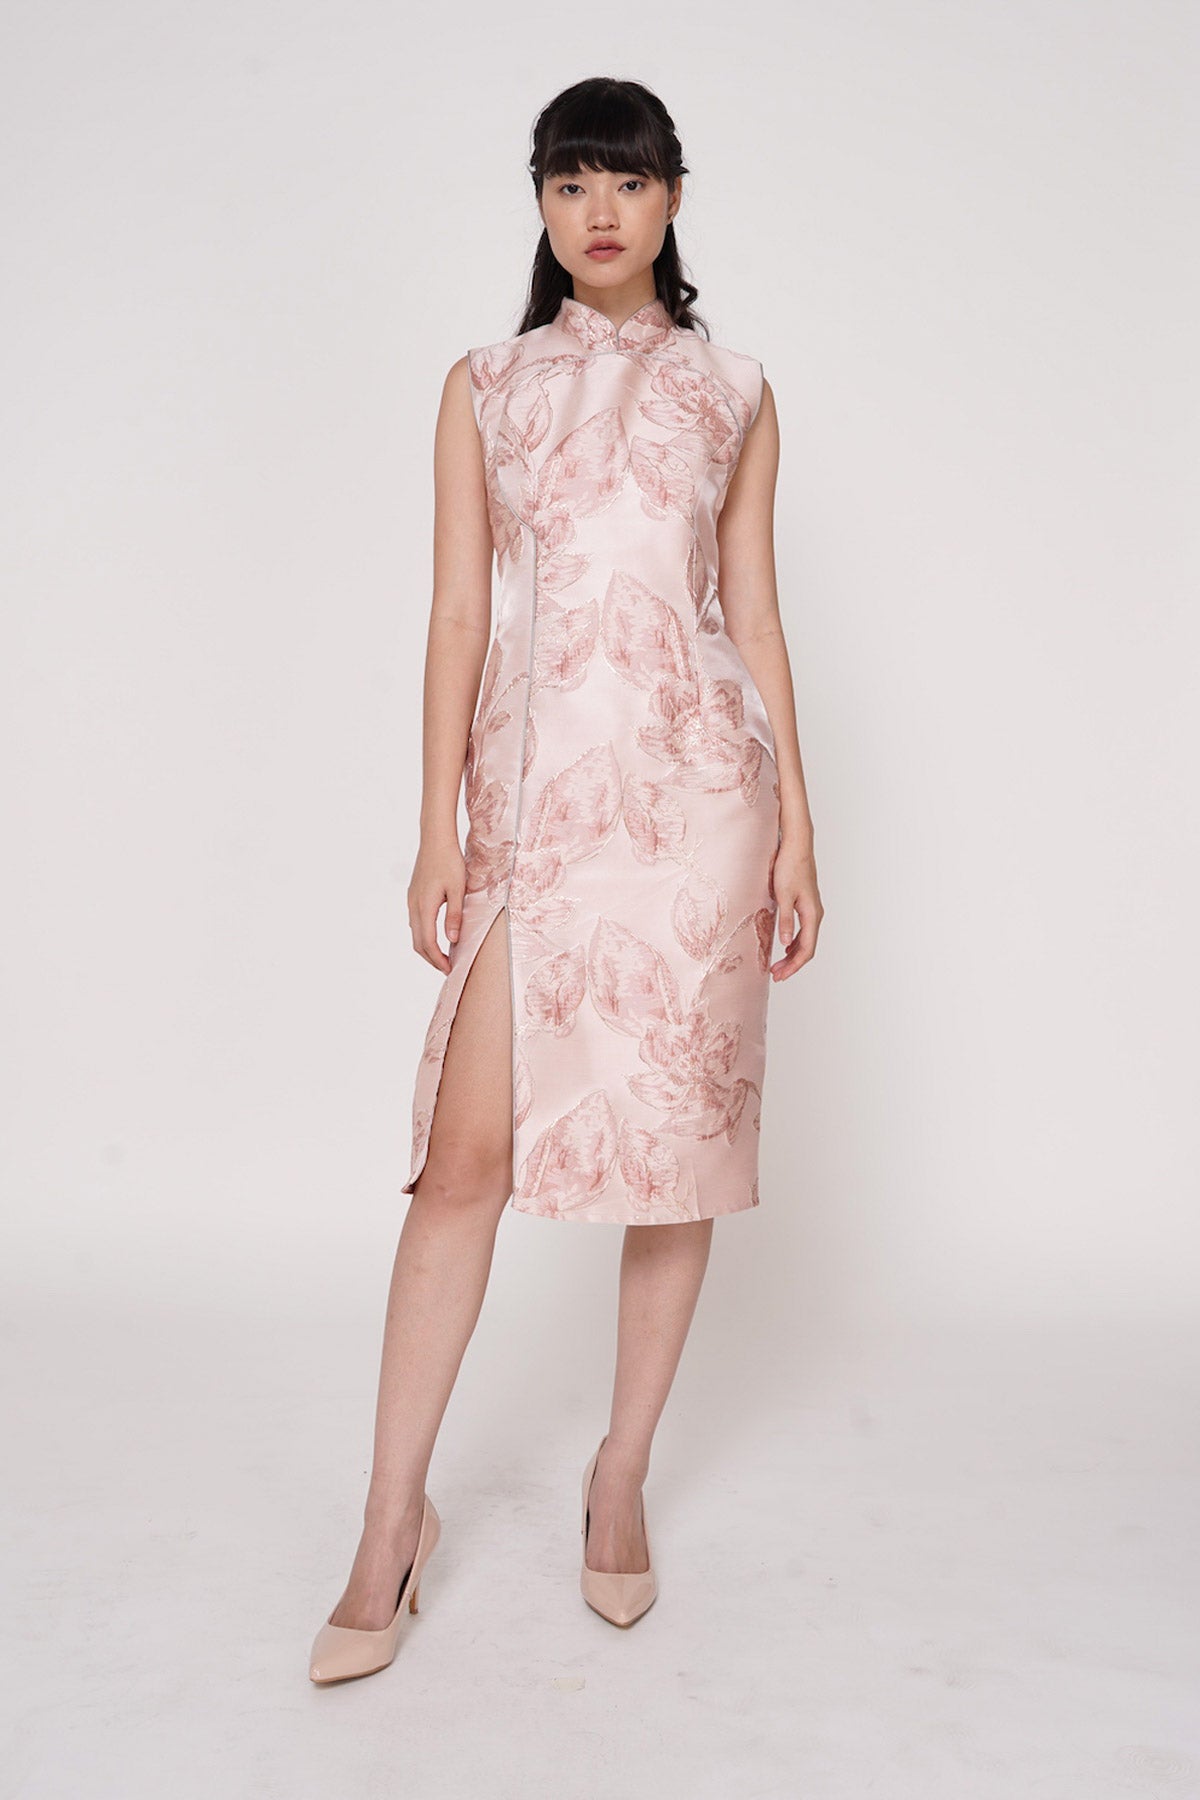 Suanni Dress In Pink (2 LEFT)